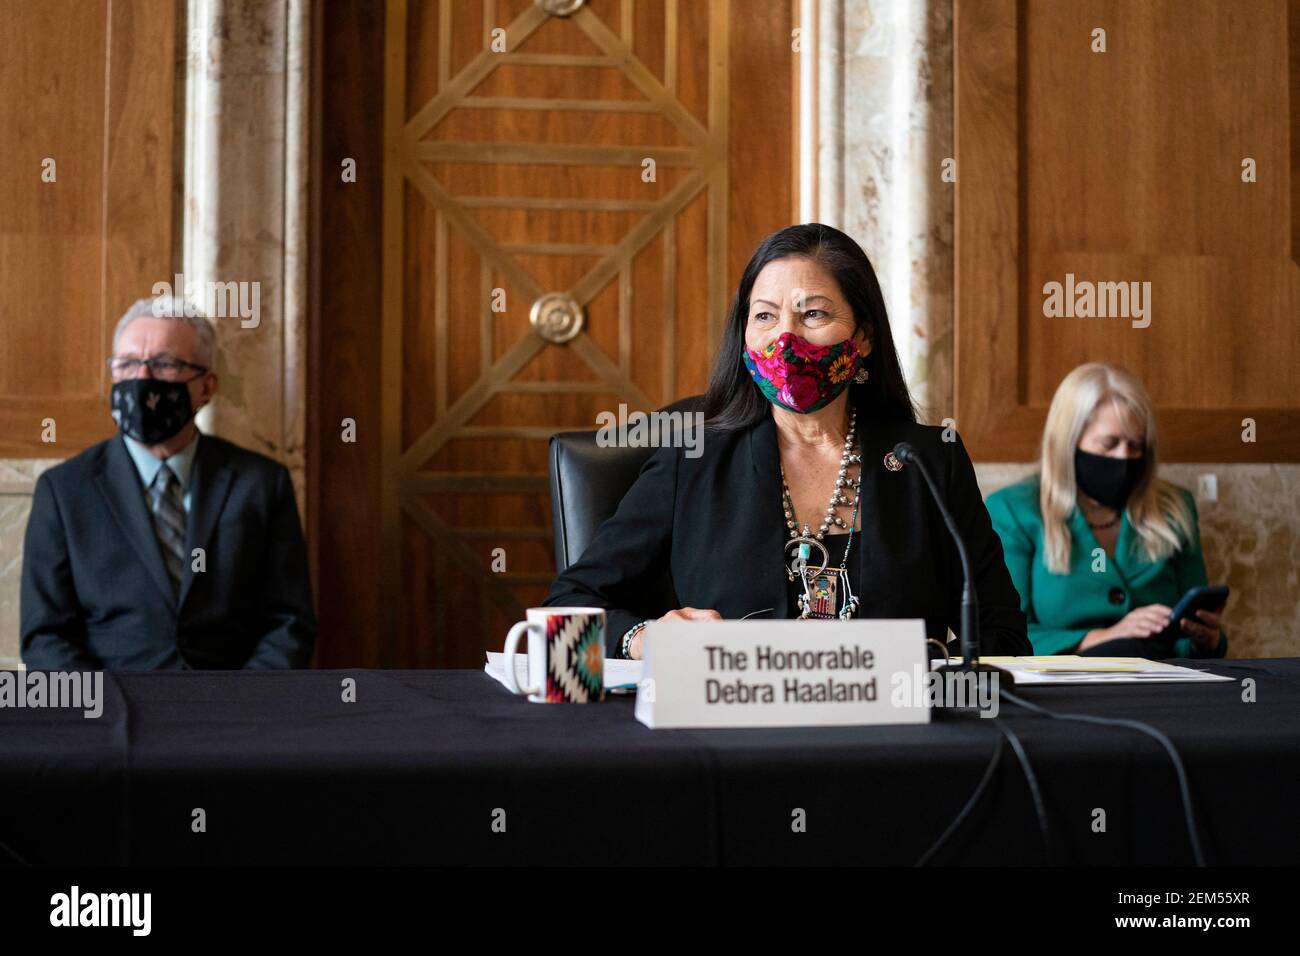 Representative Deb Haaland, a Democrat from New Mexico and secretary of the interior nominee for U.S. President Joe Biden, listens during a Senate Energy and Natural Resources Committee confirmation hearing in Washington, D.C., U.S., on Wednesday, Feb. 24, 2021. Haaland downplayed her past opposition to fracking during a heated hearing yesterday as she sought to reassure senators worried she would clamp down on fossil fuel development. Photo by Sarah Silbiger/Pool/ABACAPRESS.COM Stock Photo